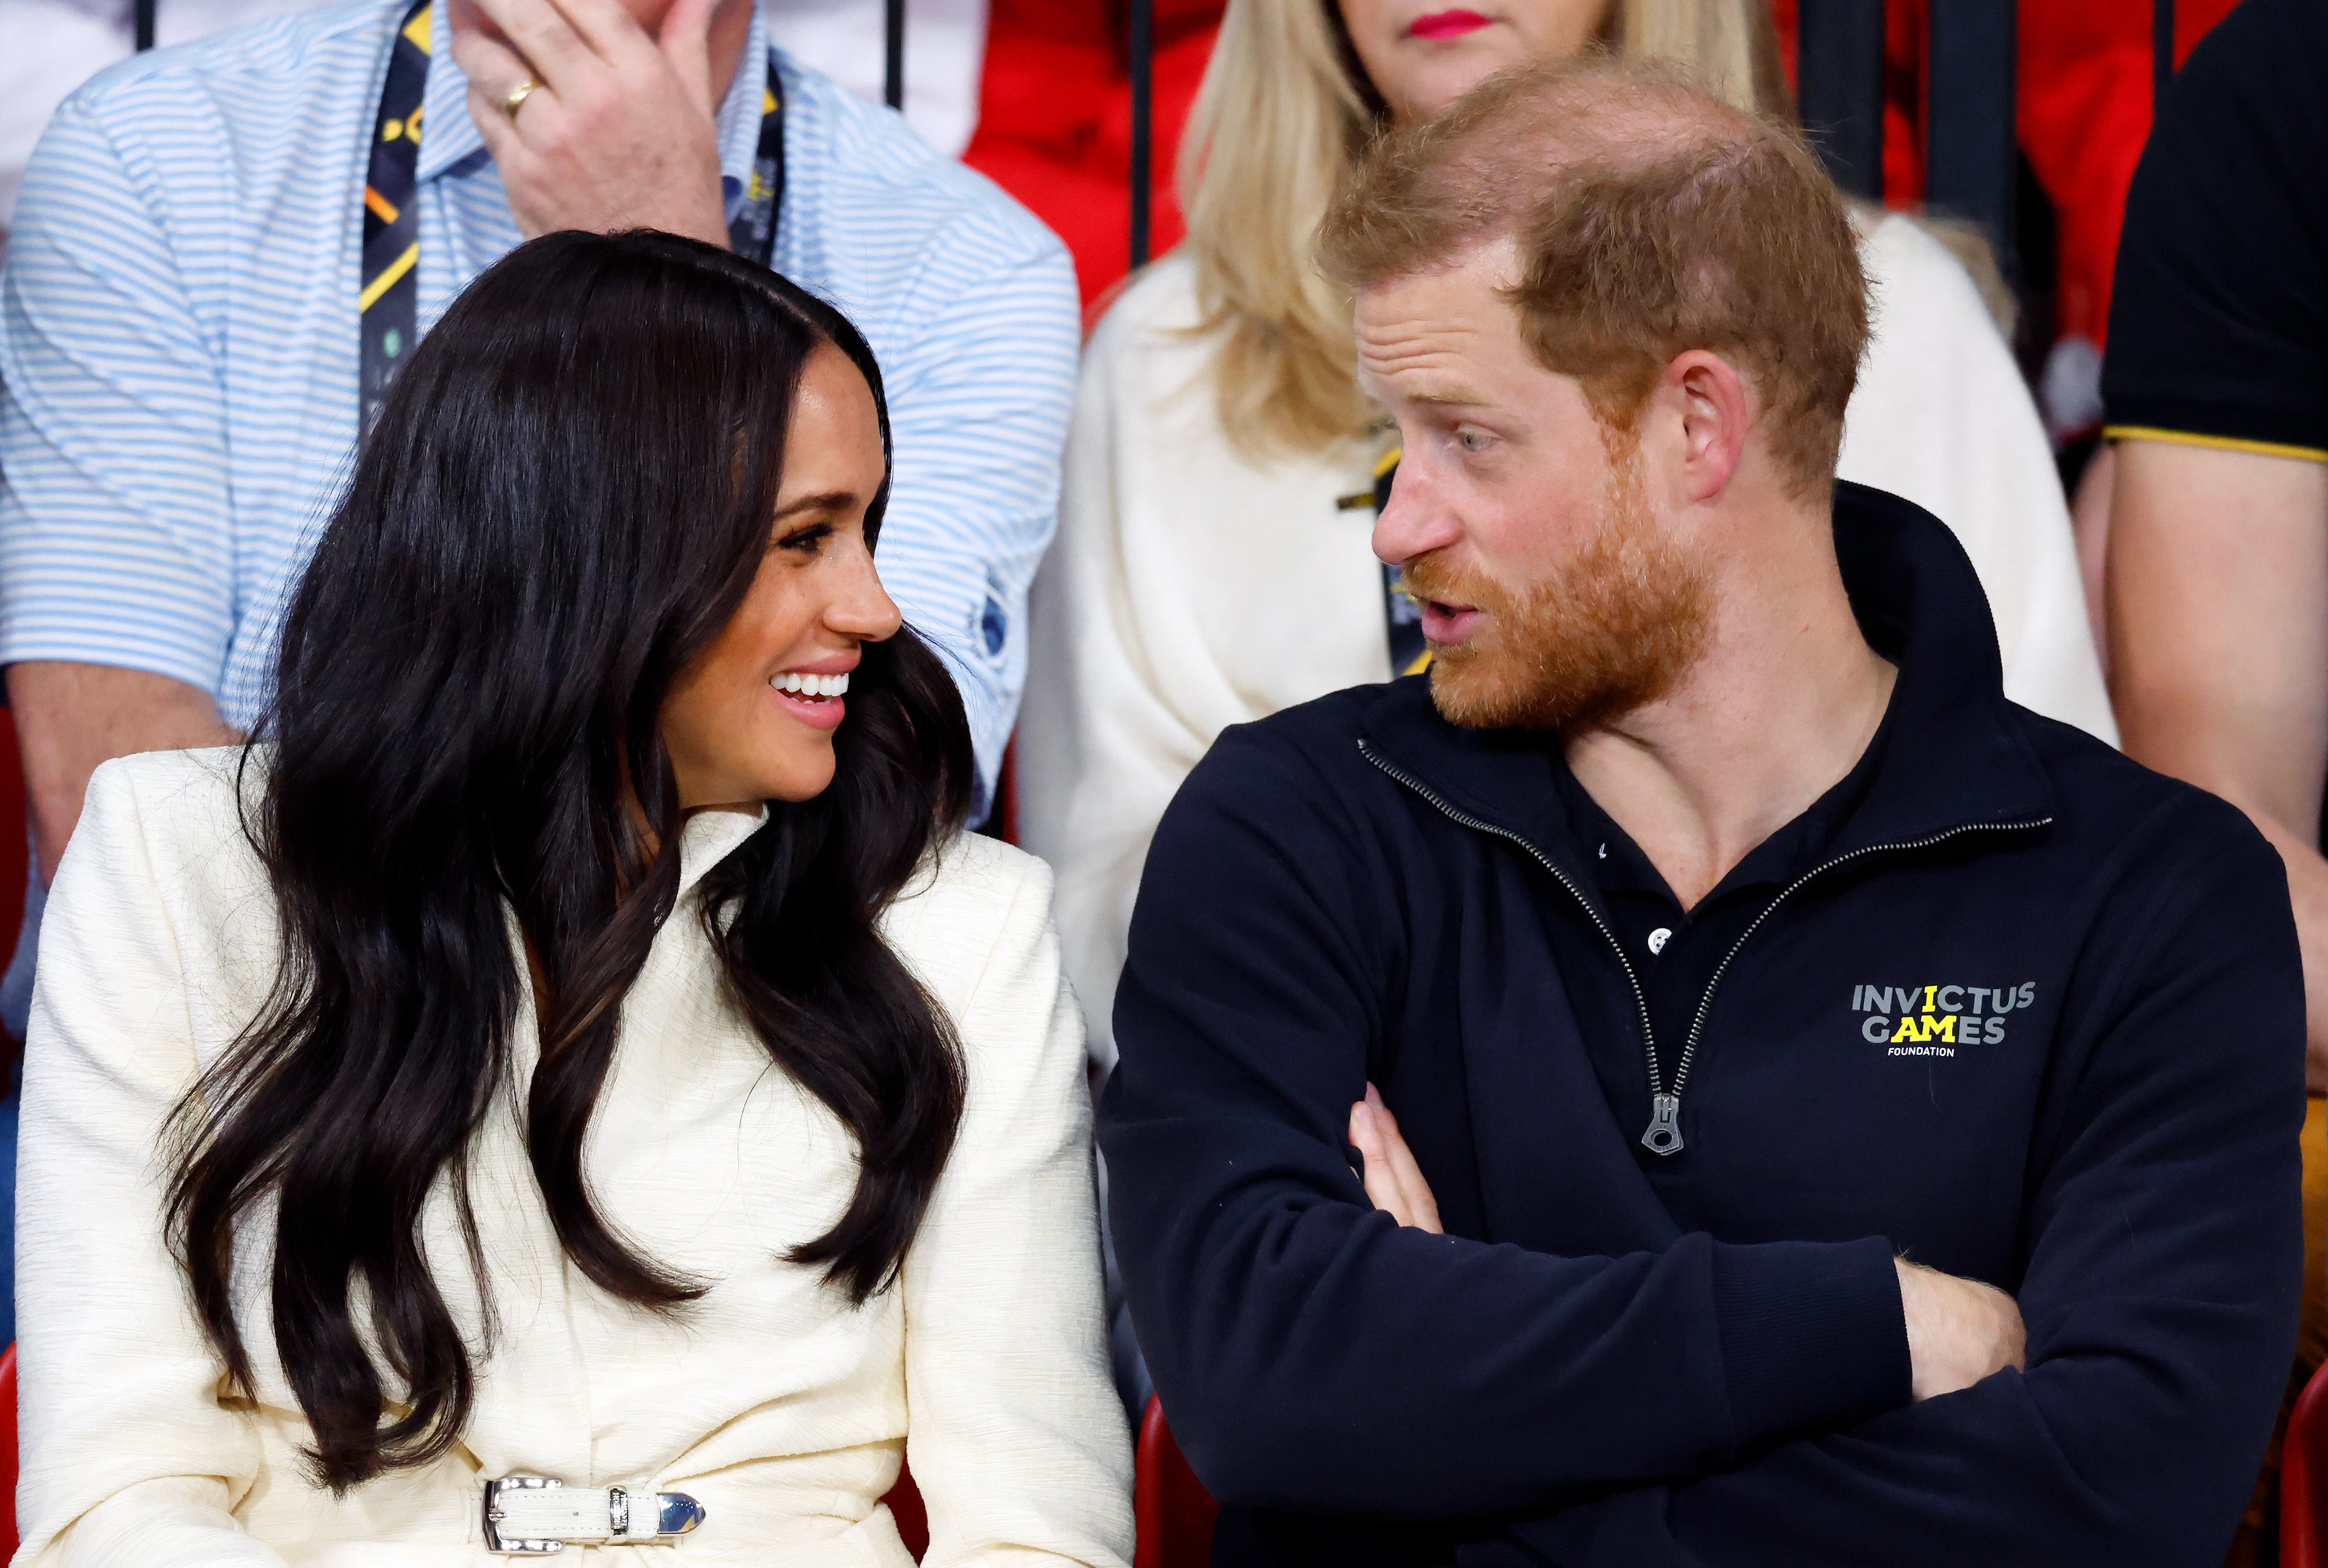 Prince Harry, Duke of Sussex and Meghan, Duchess of Sussex, at the Invictus Games at Zuiderpark on April 17, 2022 in The Hague, Netherlands | Source: Getty Images